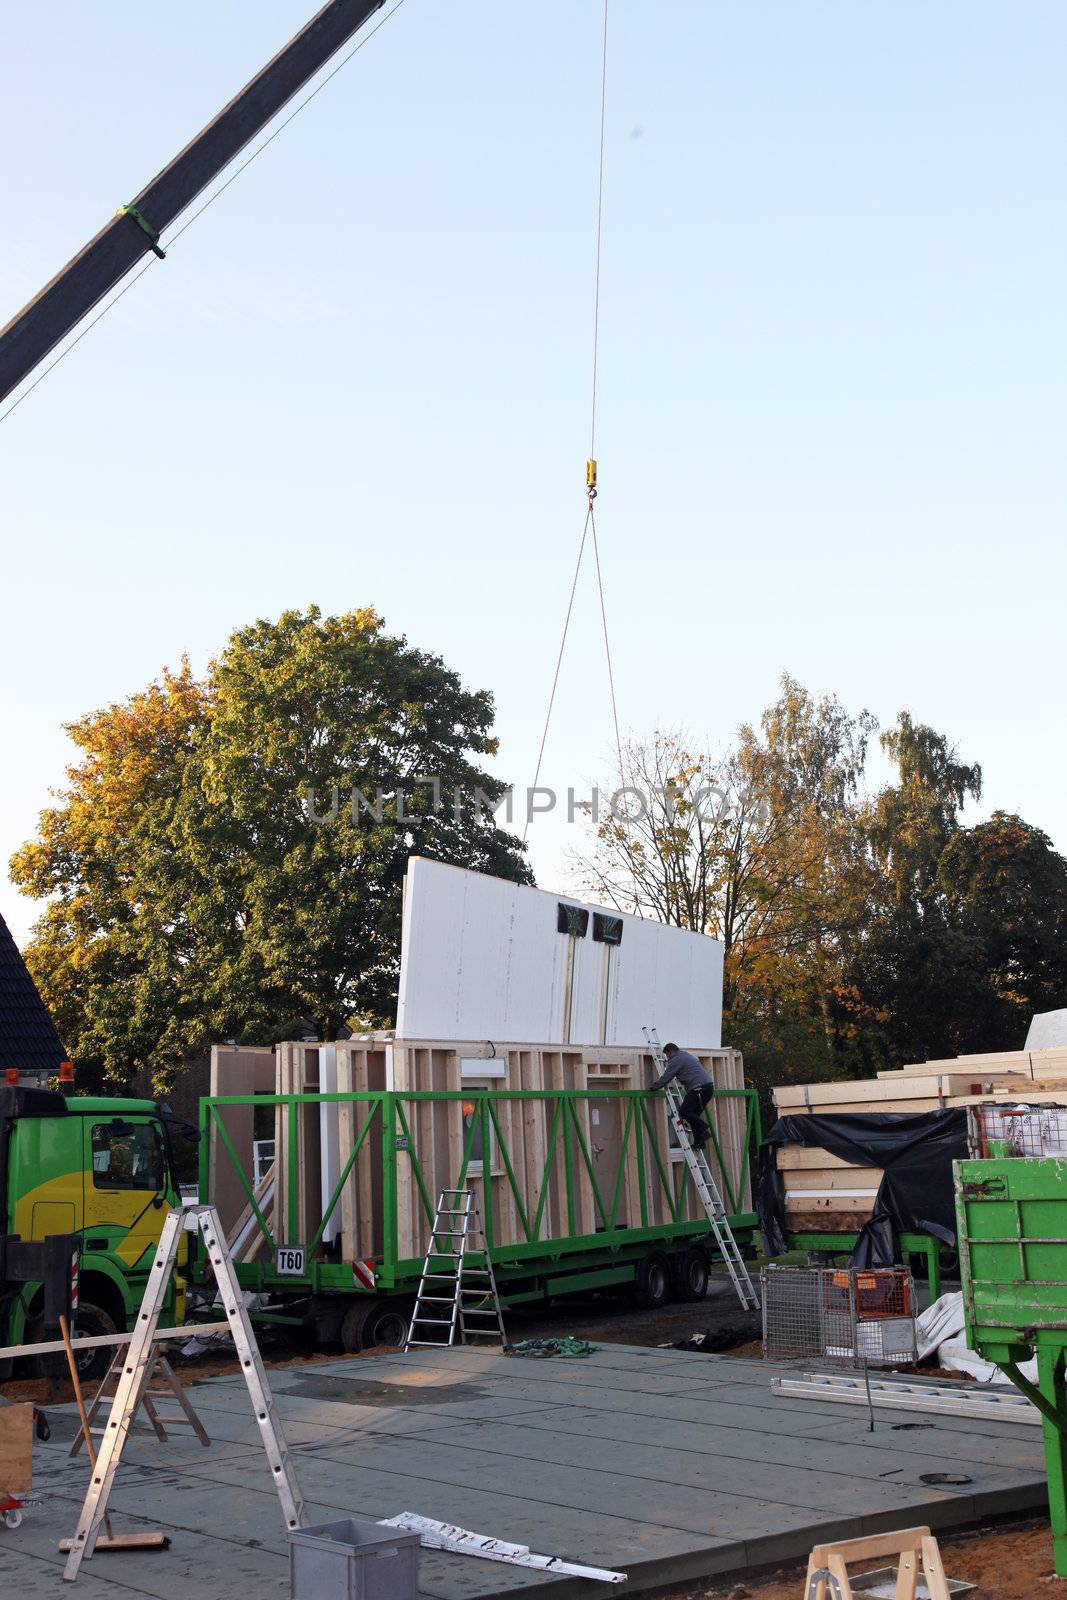 Crane lifting a section of a prefabricated timber house out of the housing on the specially adapted trailer used to transport it to the building site